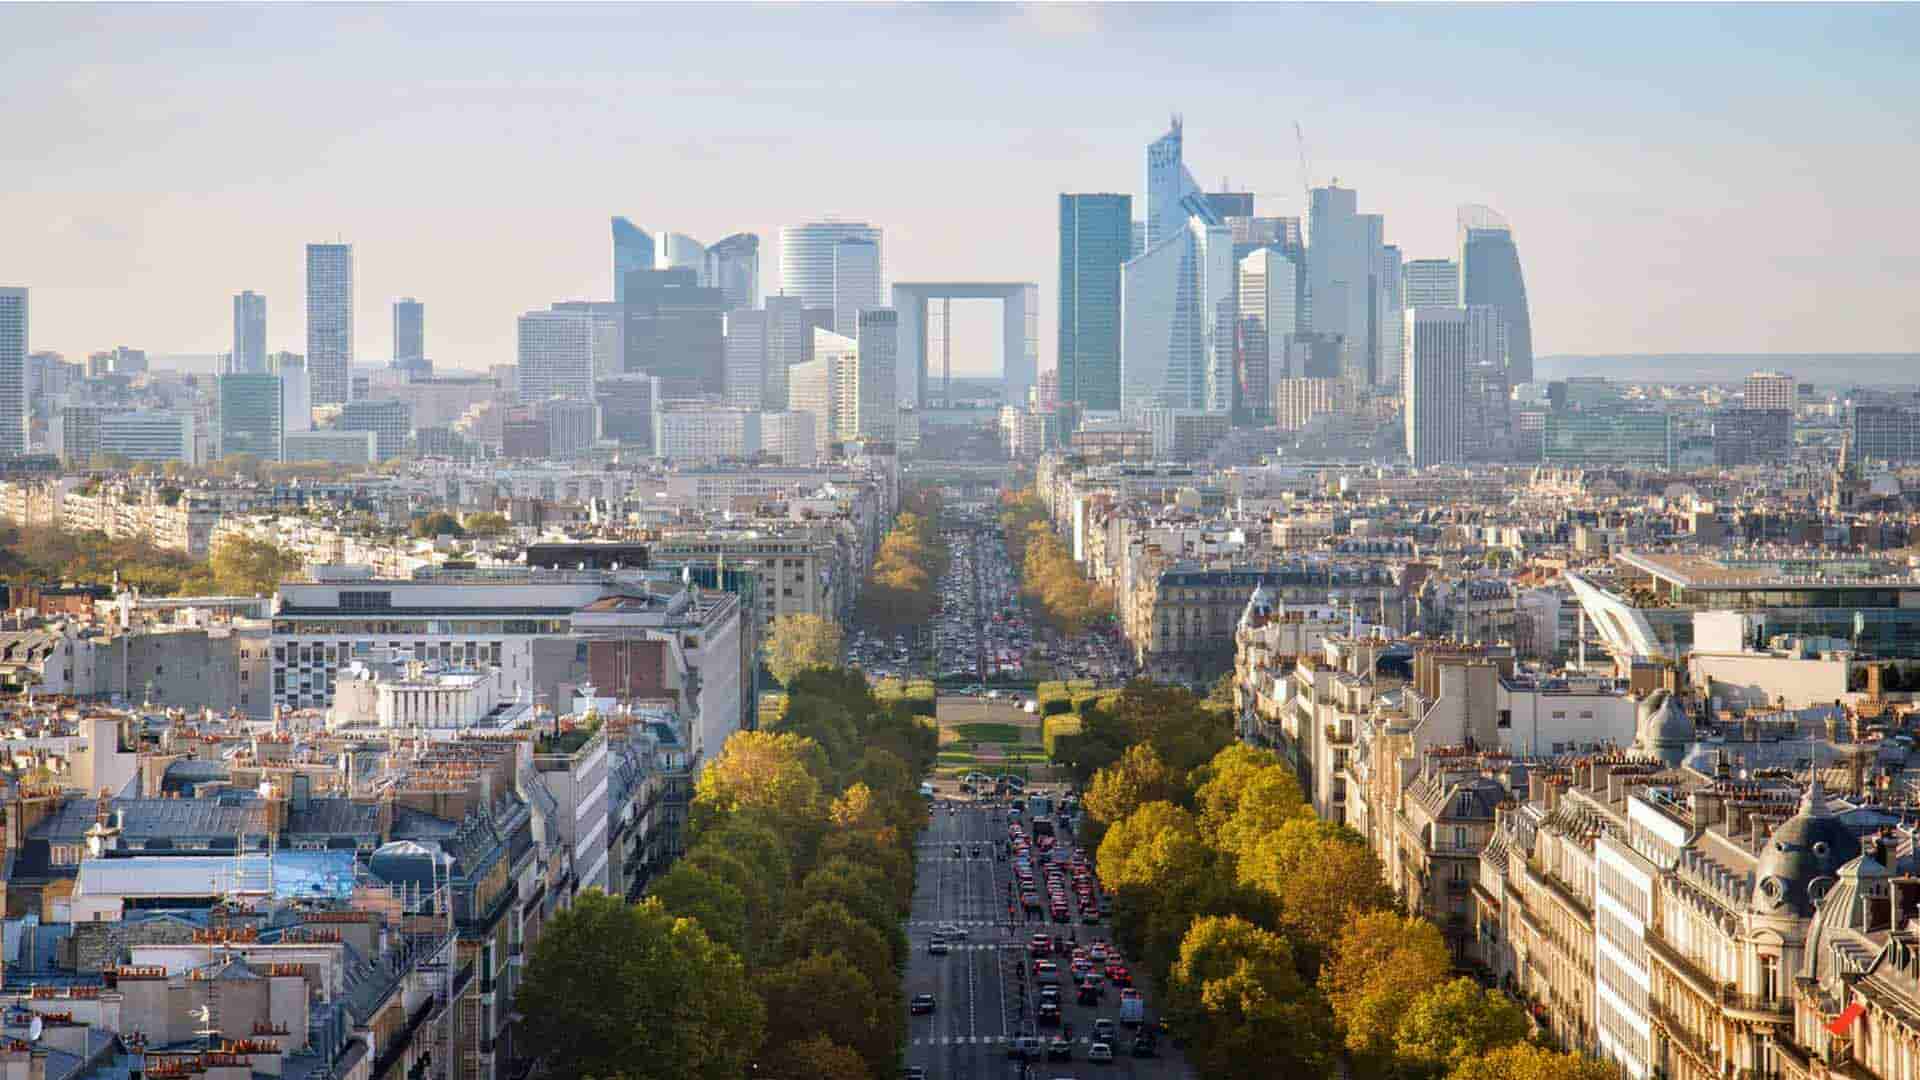 Metropole du Grand Paris boosts city centers and districts in the metropolitan area